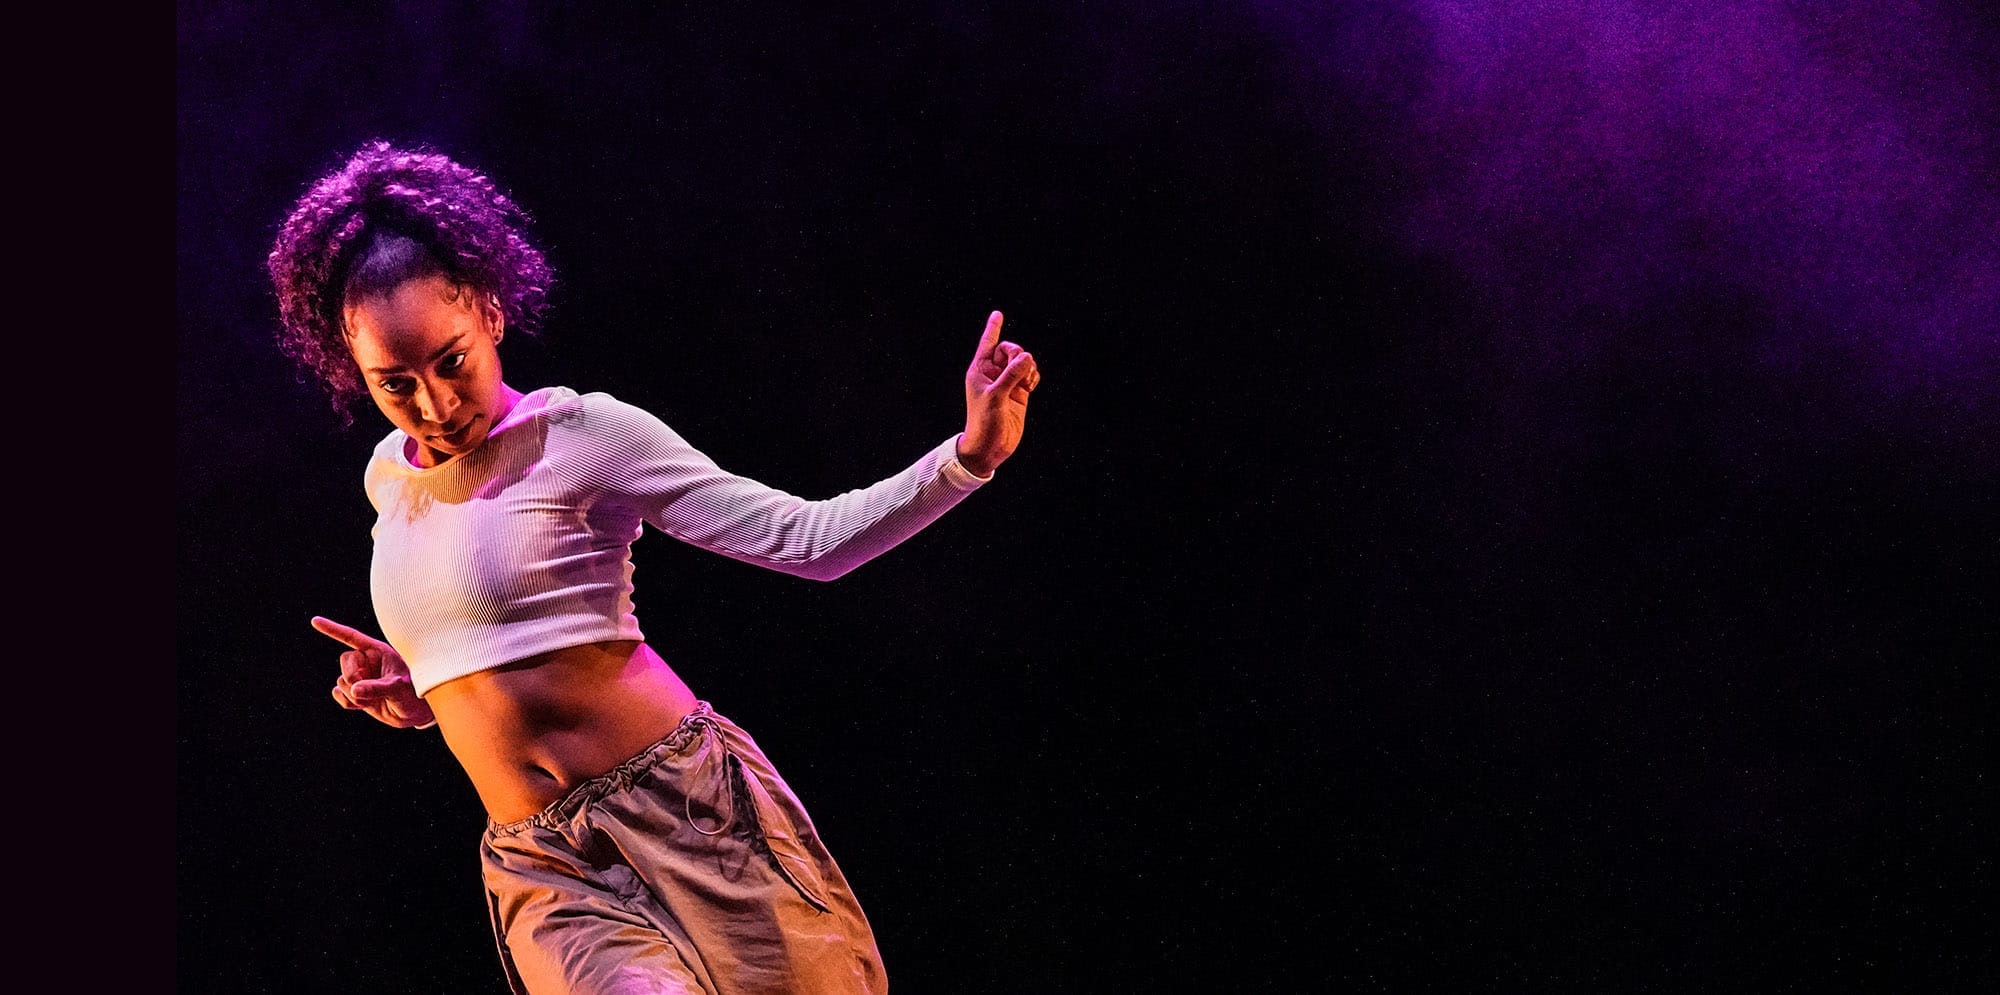 A female dancer is featured onstage. She has curly brown hair in an updo, a white long sleeve crop top and cargo pants. She is illuminated by purple stage lighting.